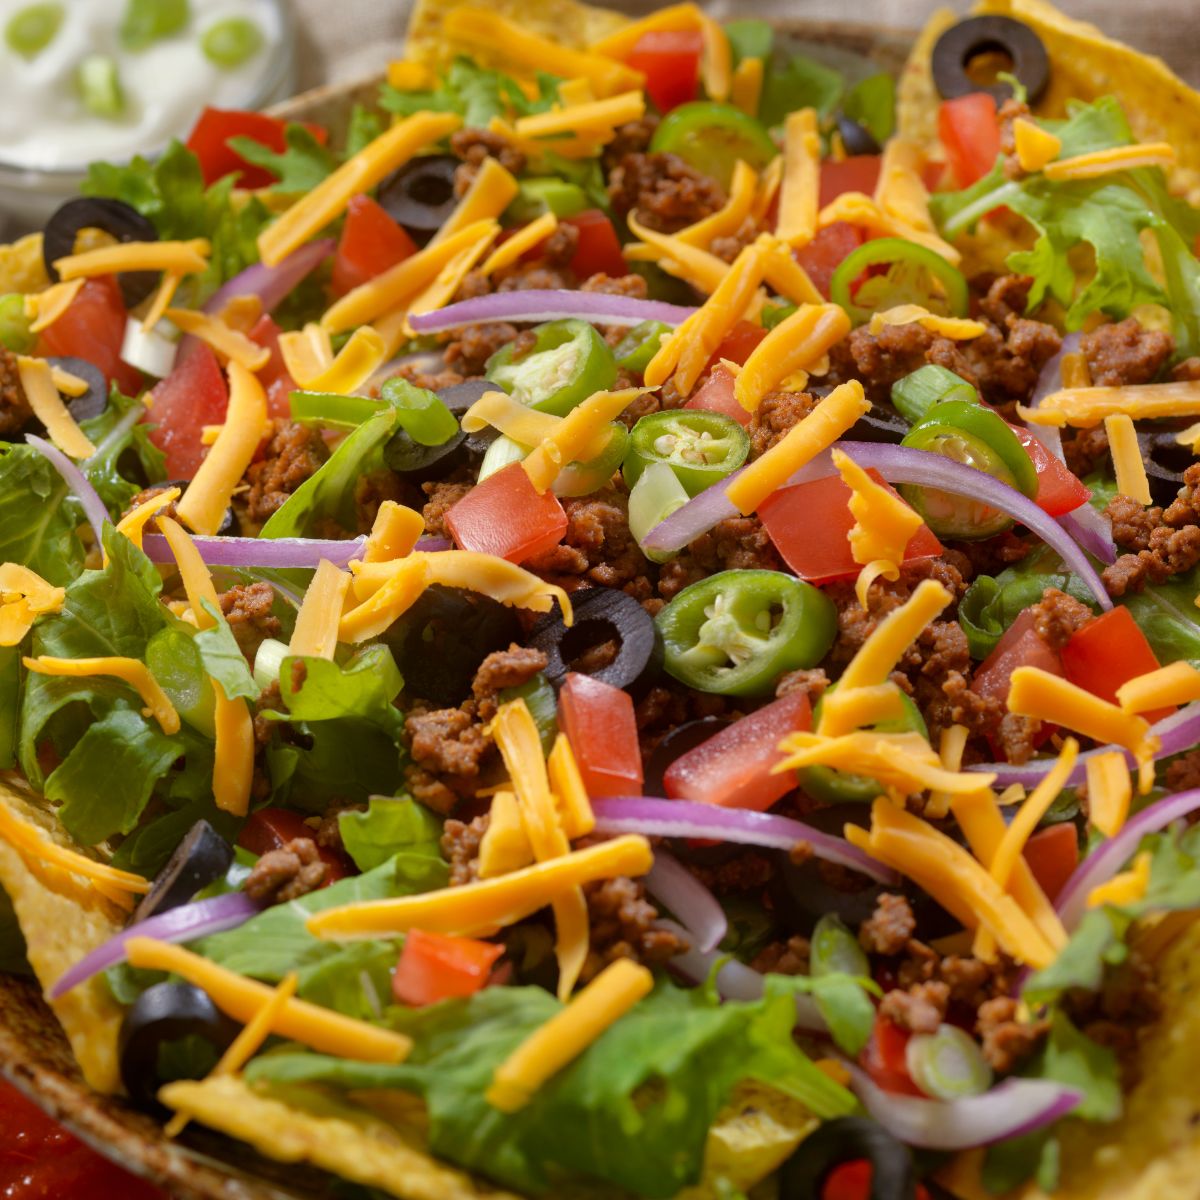 Tex-Mex Extra Virgin Olive Oil- Add to your taco salad